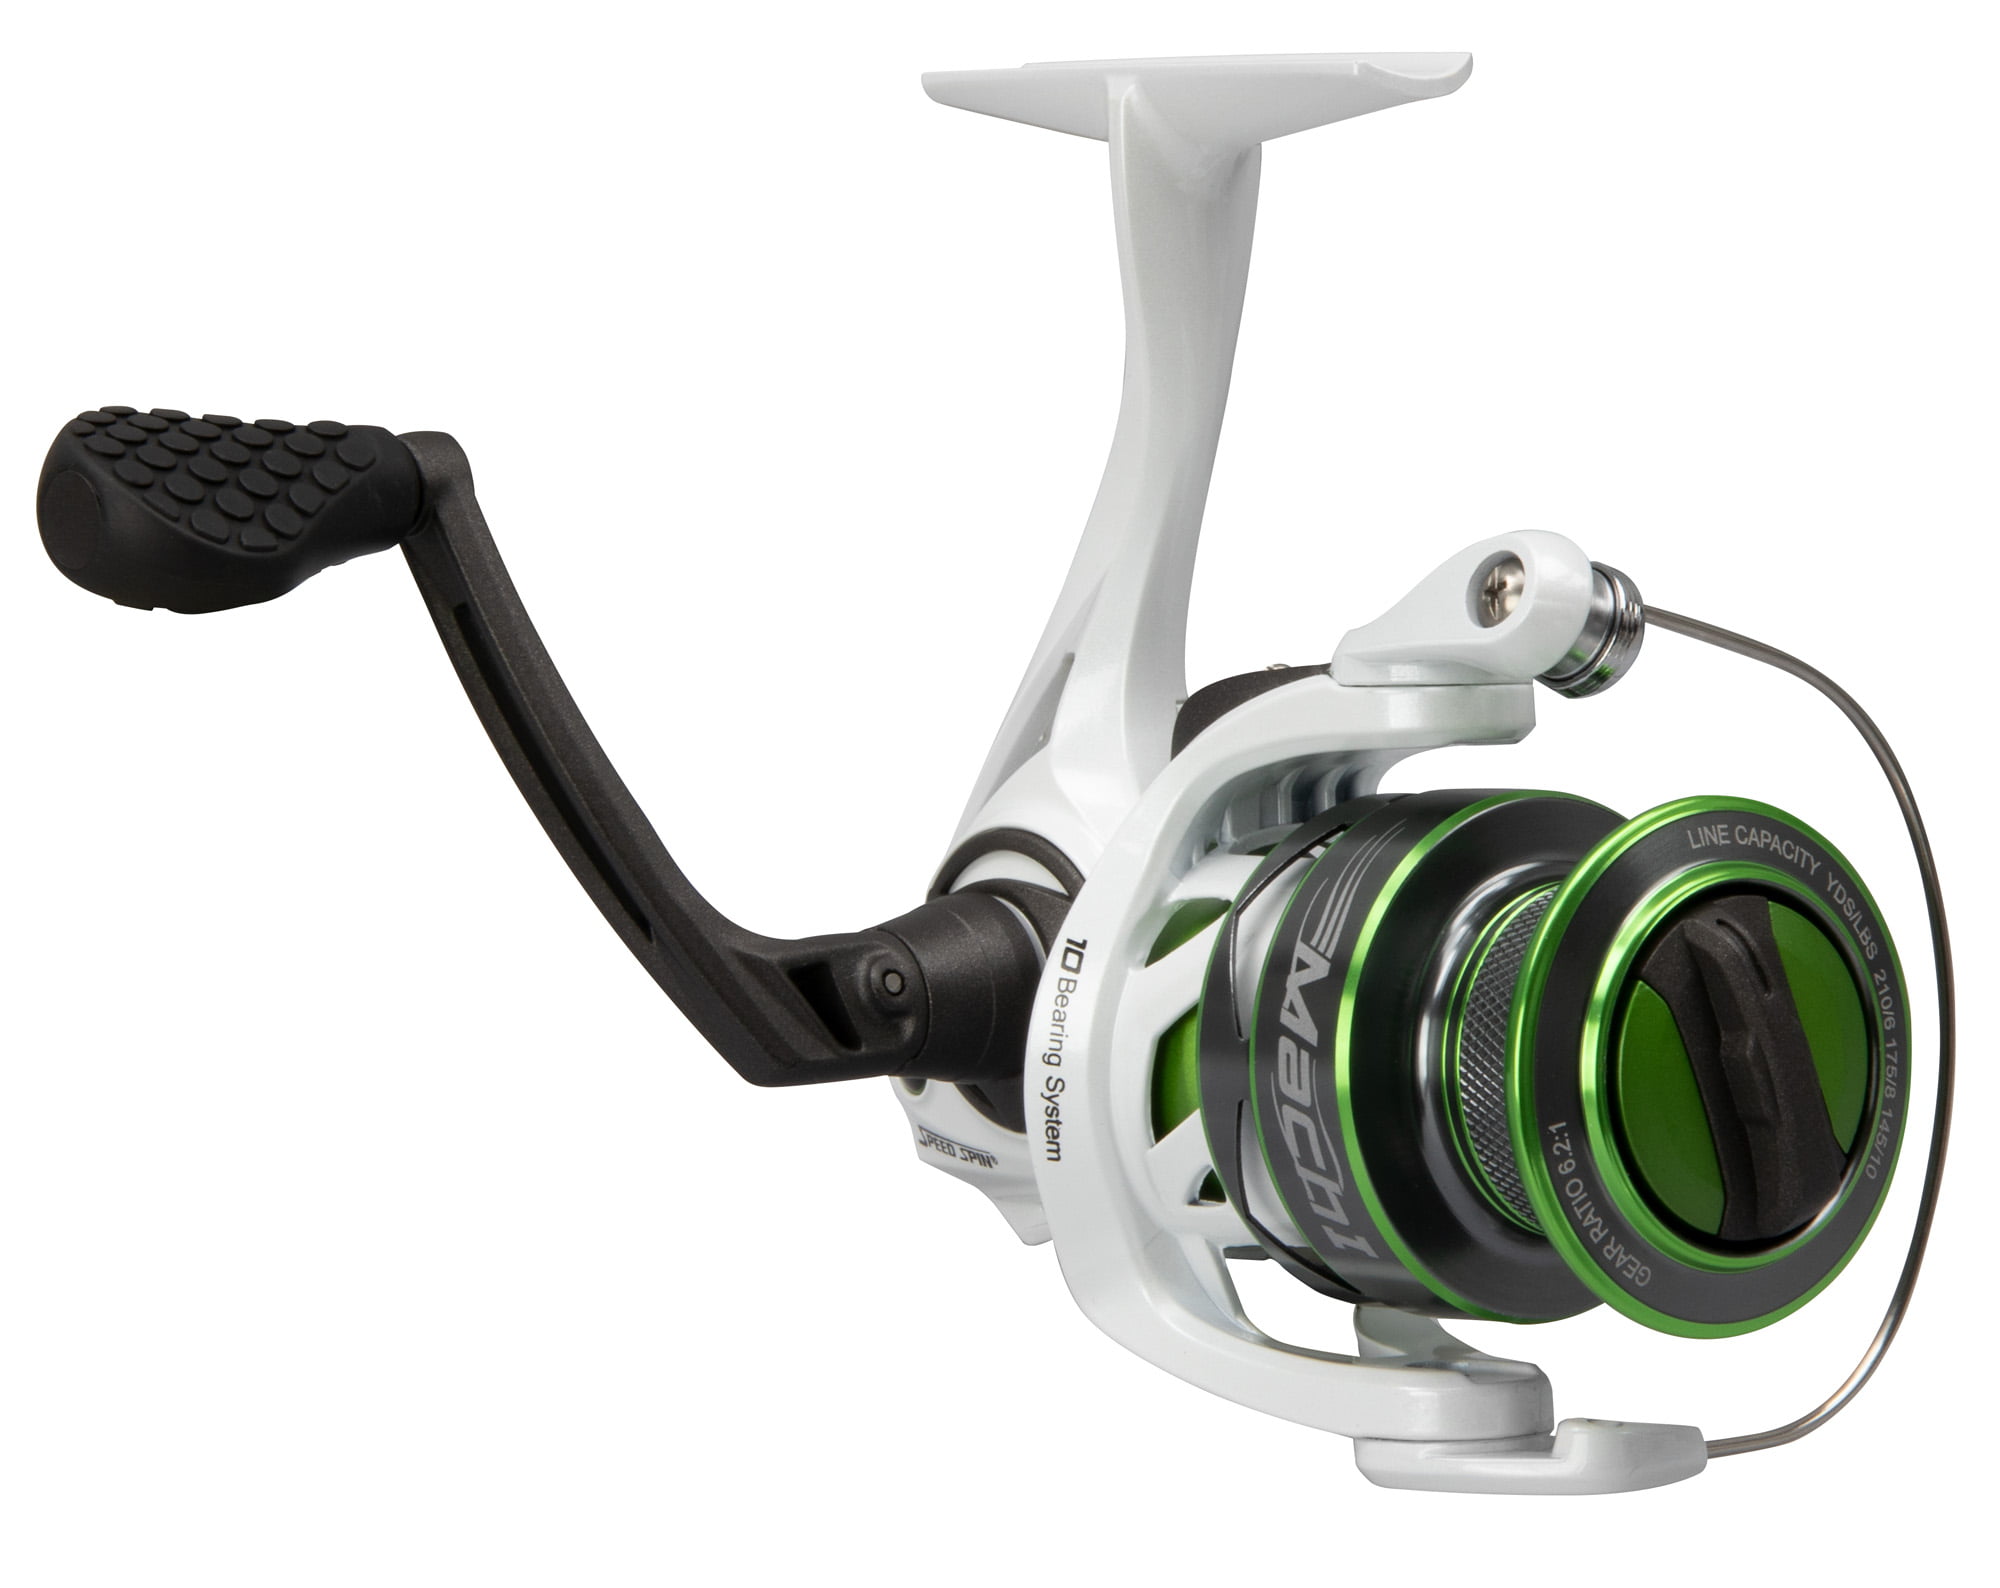 Lew's Mach I 300 6.2:1 Spinning Reel 